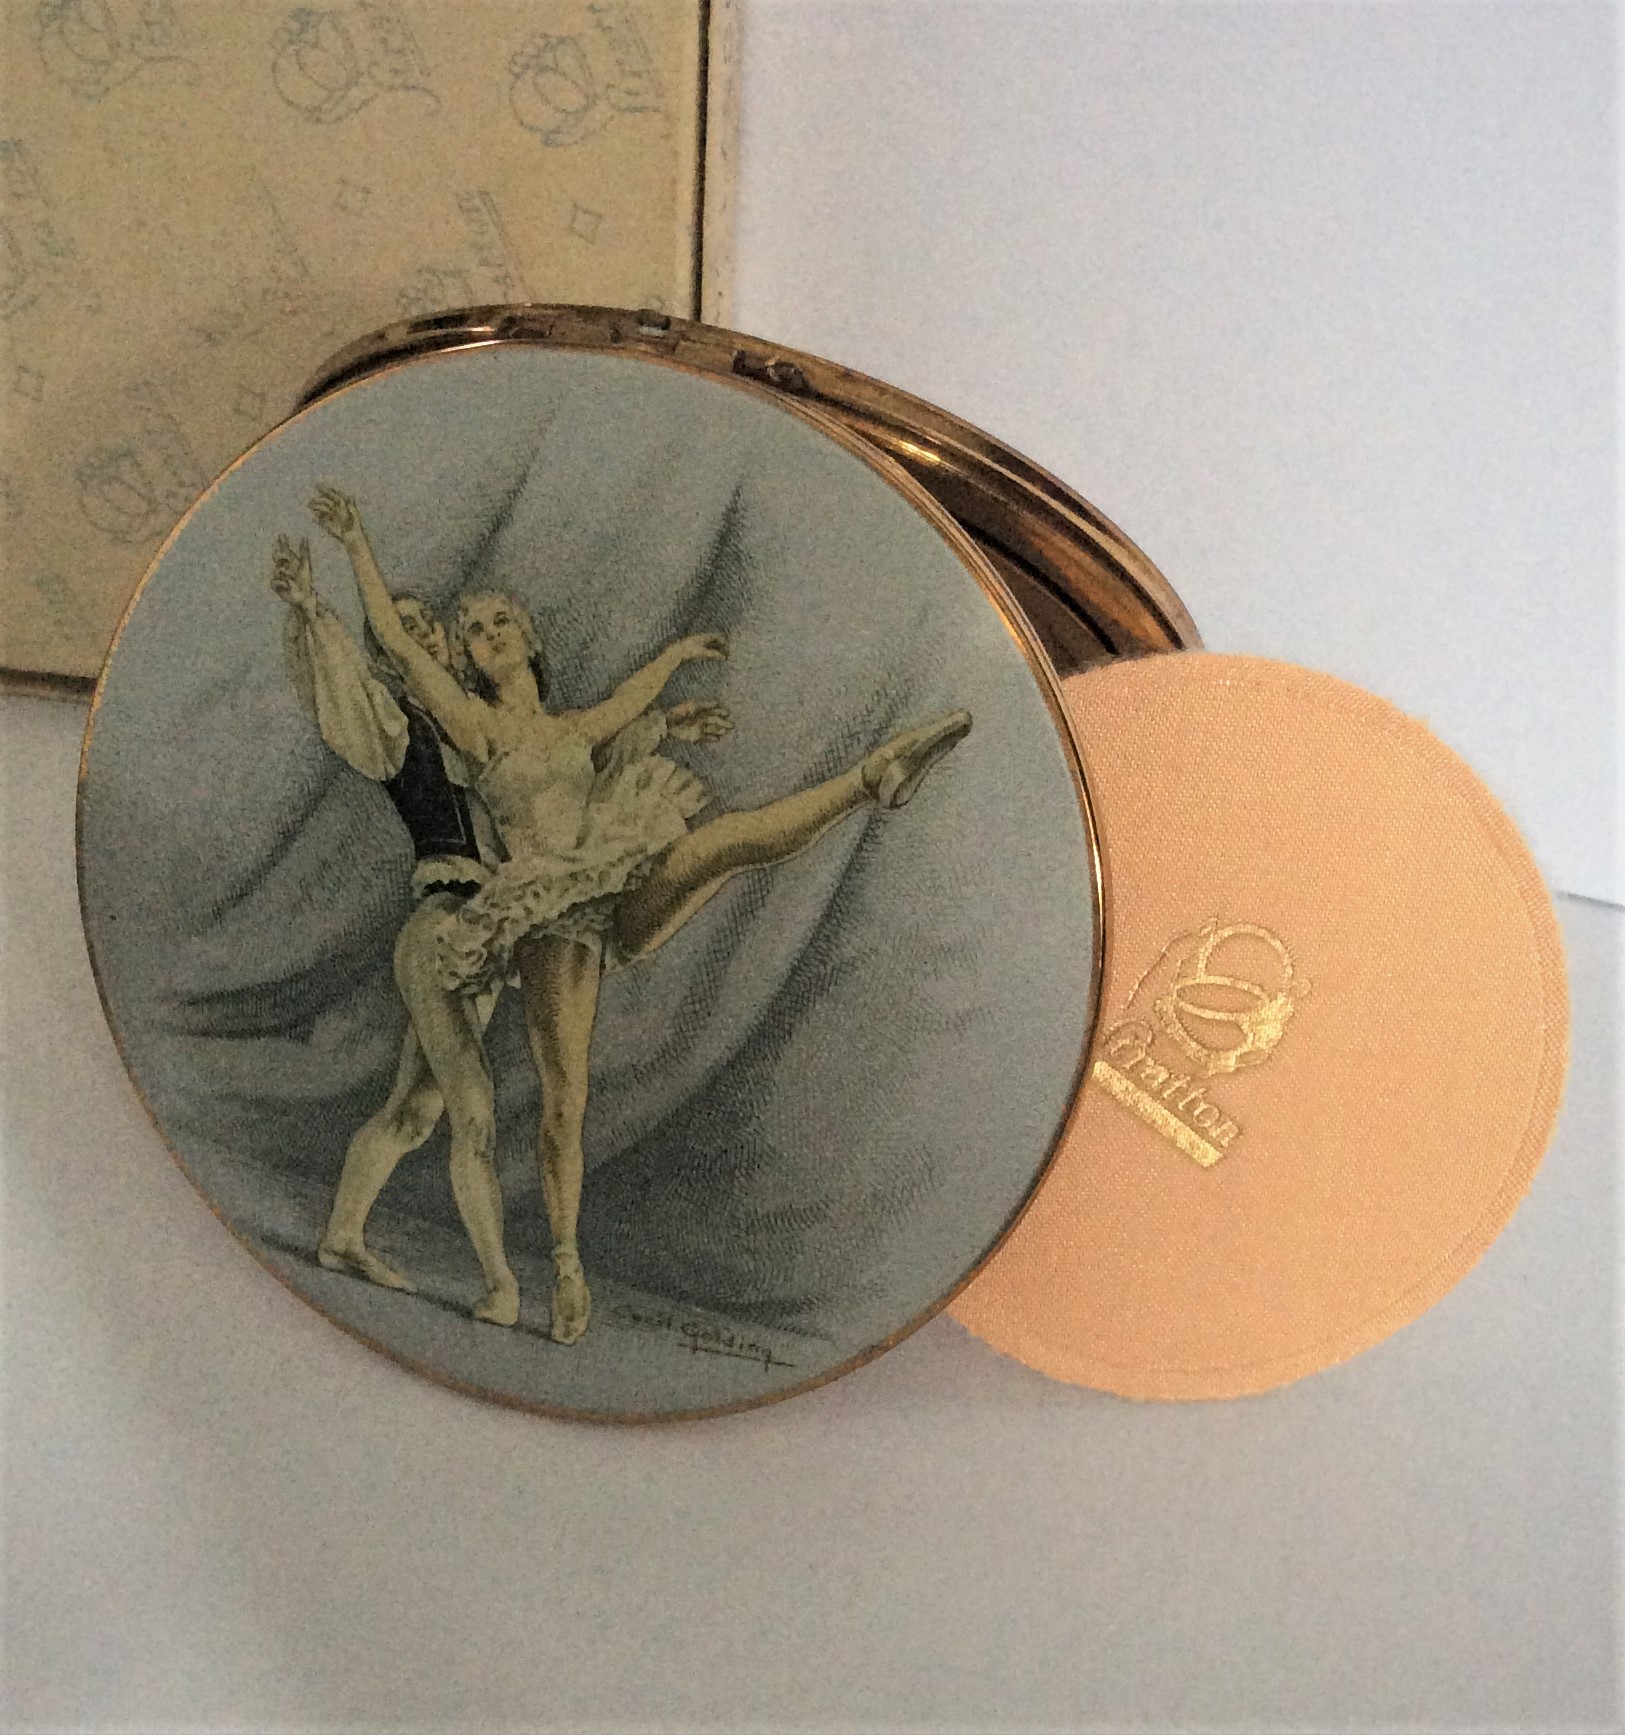 Vintage 50s UNUSED STRATTON Ballerina Enamel and Gold Tone Powder Compact Signed Cecil Golding.  Black felt sleeve and original vintage Stratton box included.  Compact size: 8.3cm All mechanisms working. Stunning for display or use.  